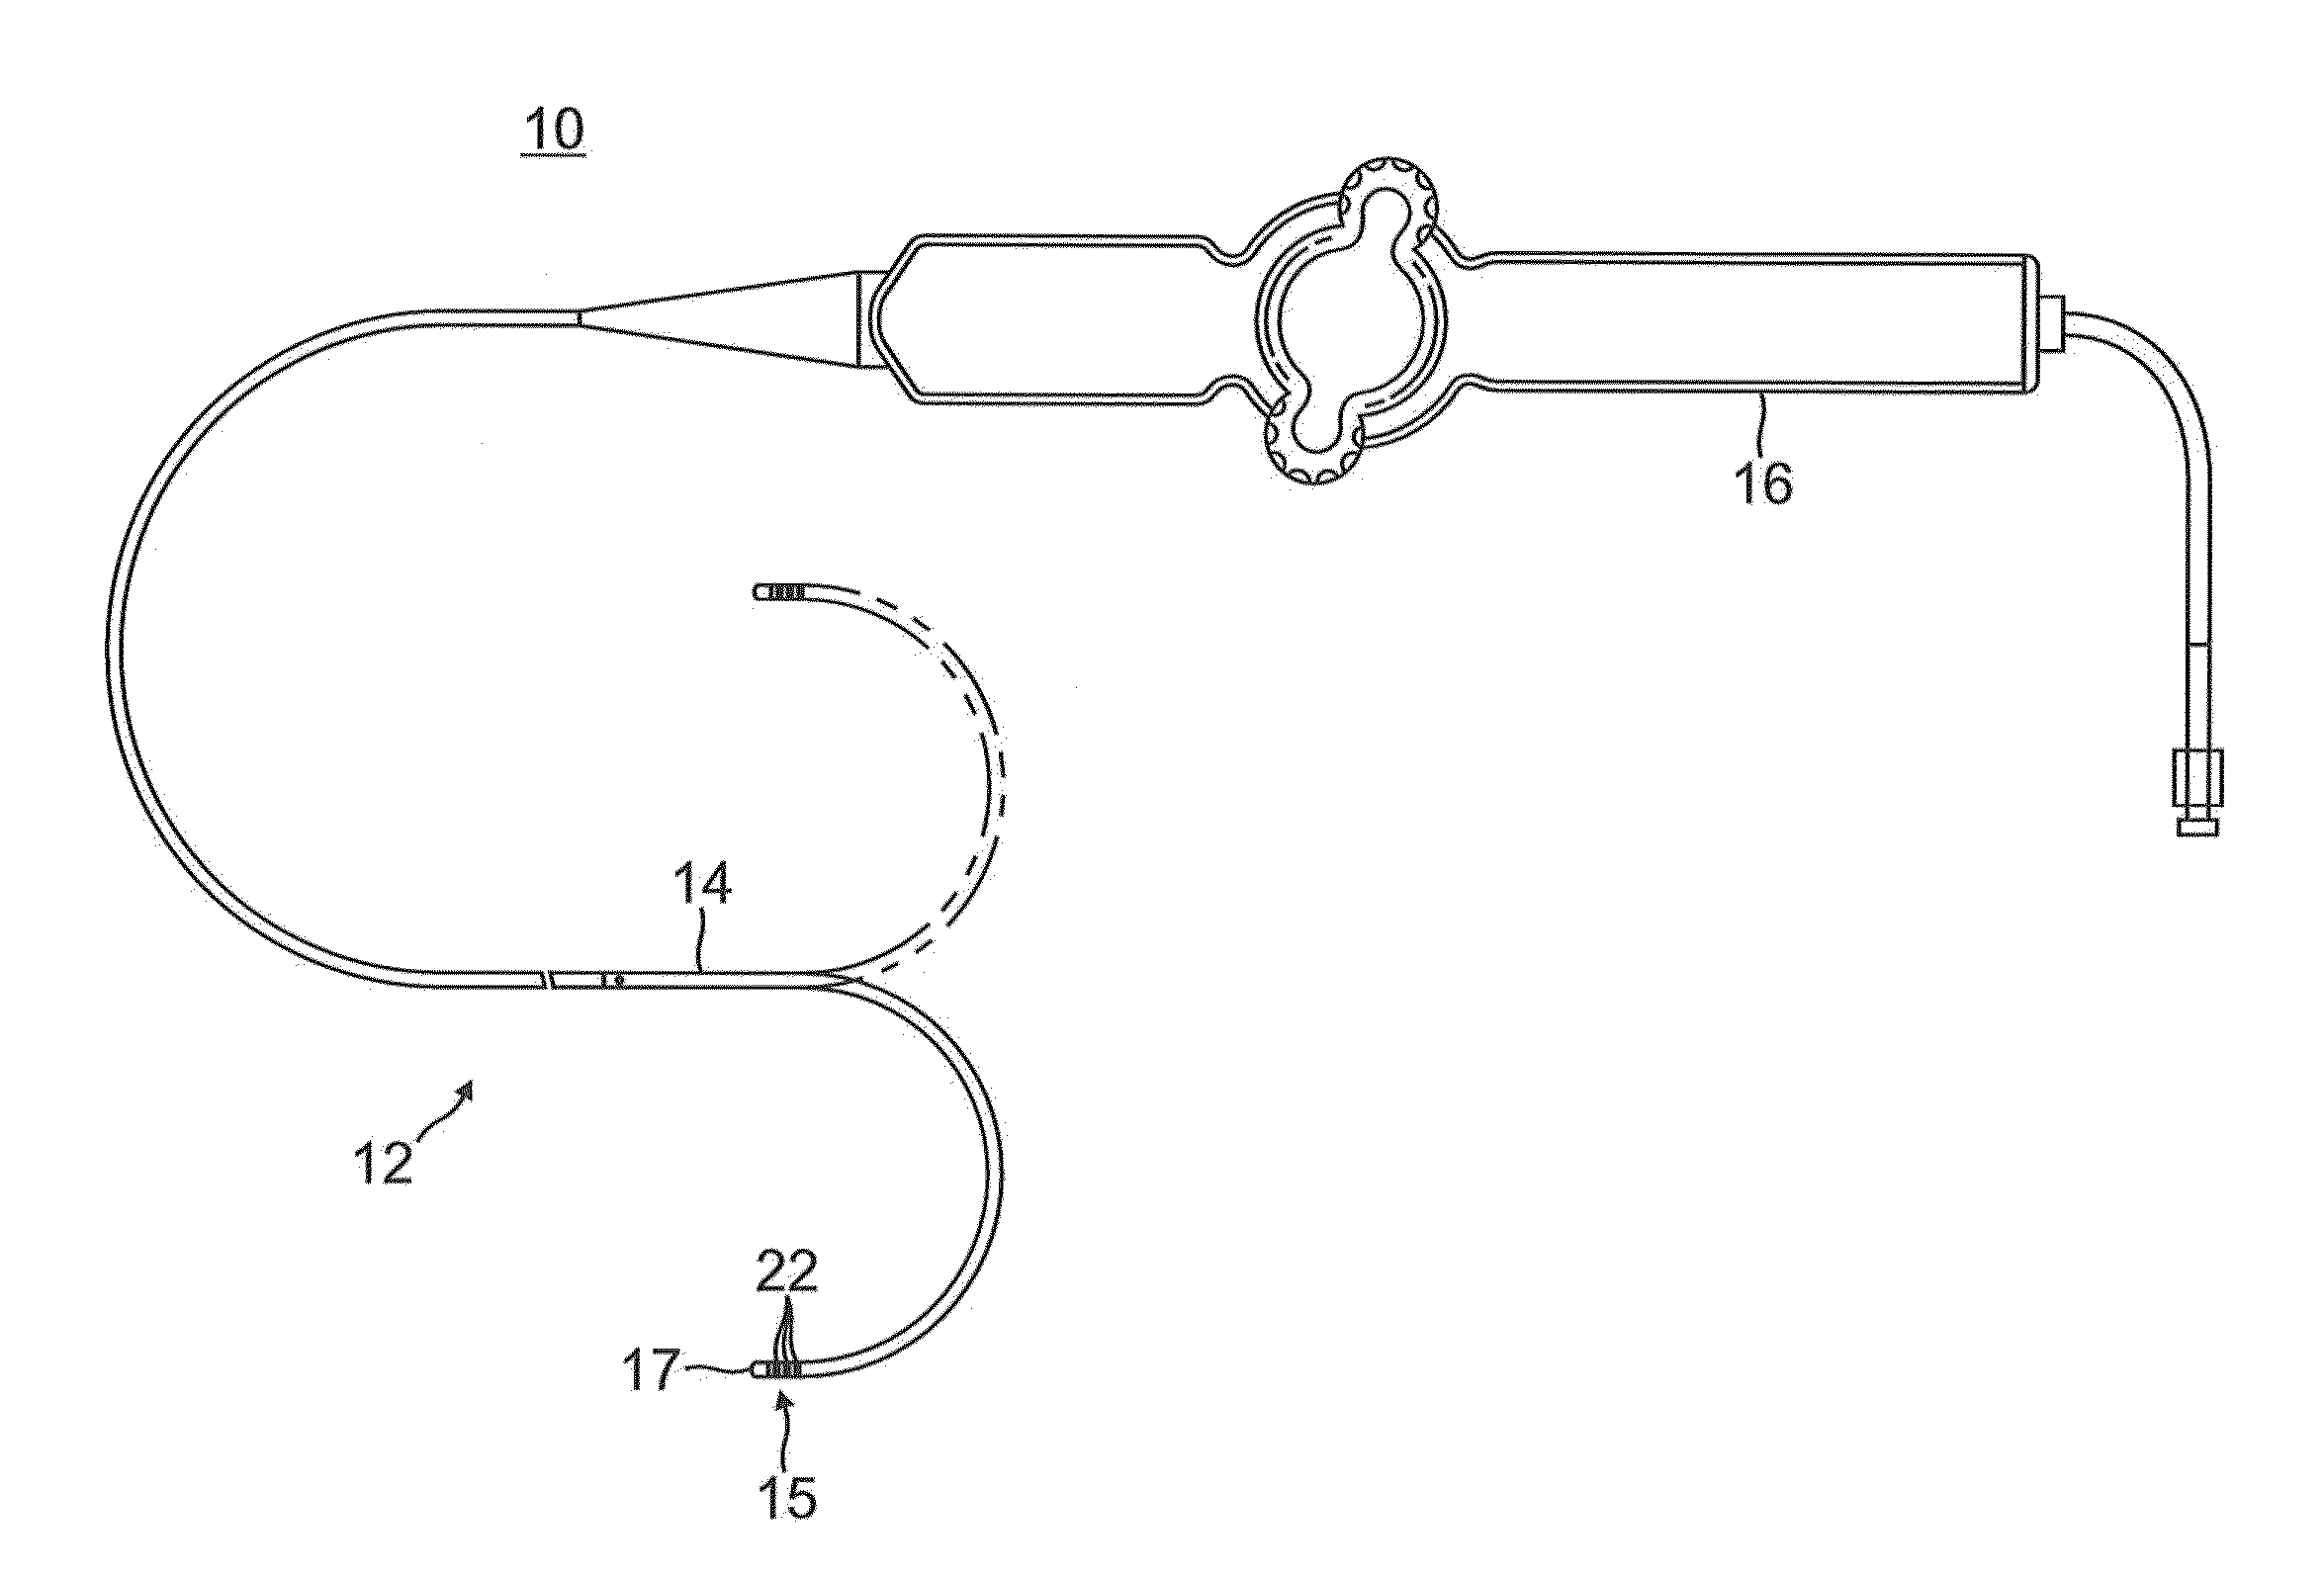 Irrigated ablation catheter having irrigation ports with reduced hydraulic resistance